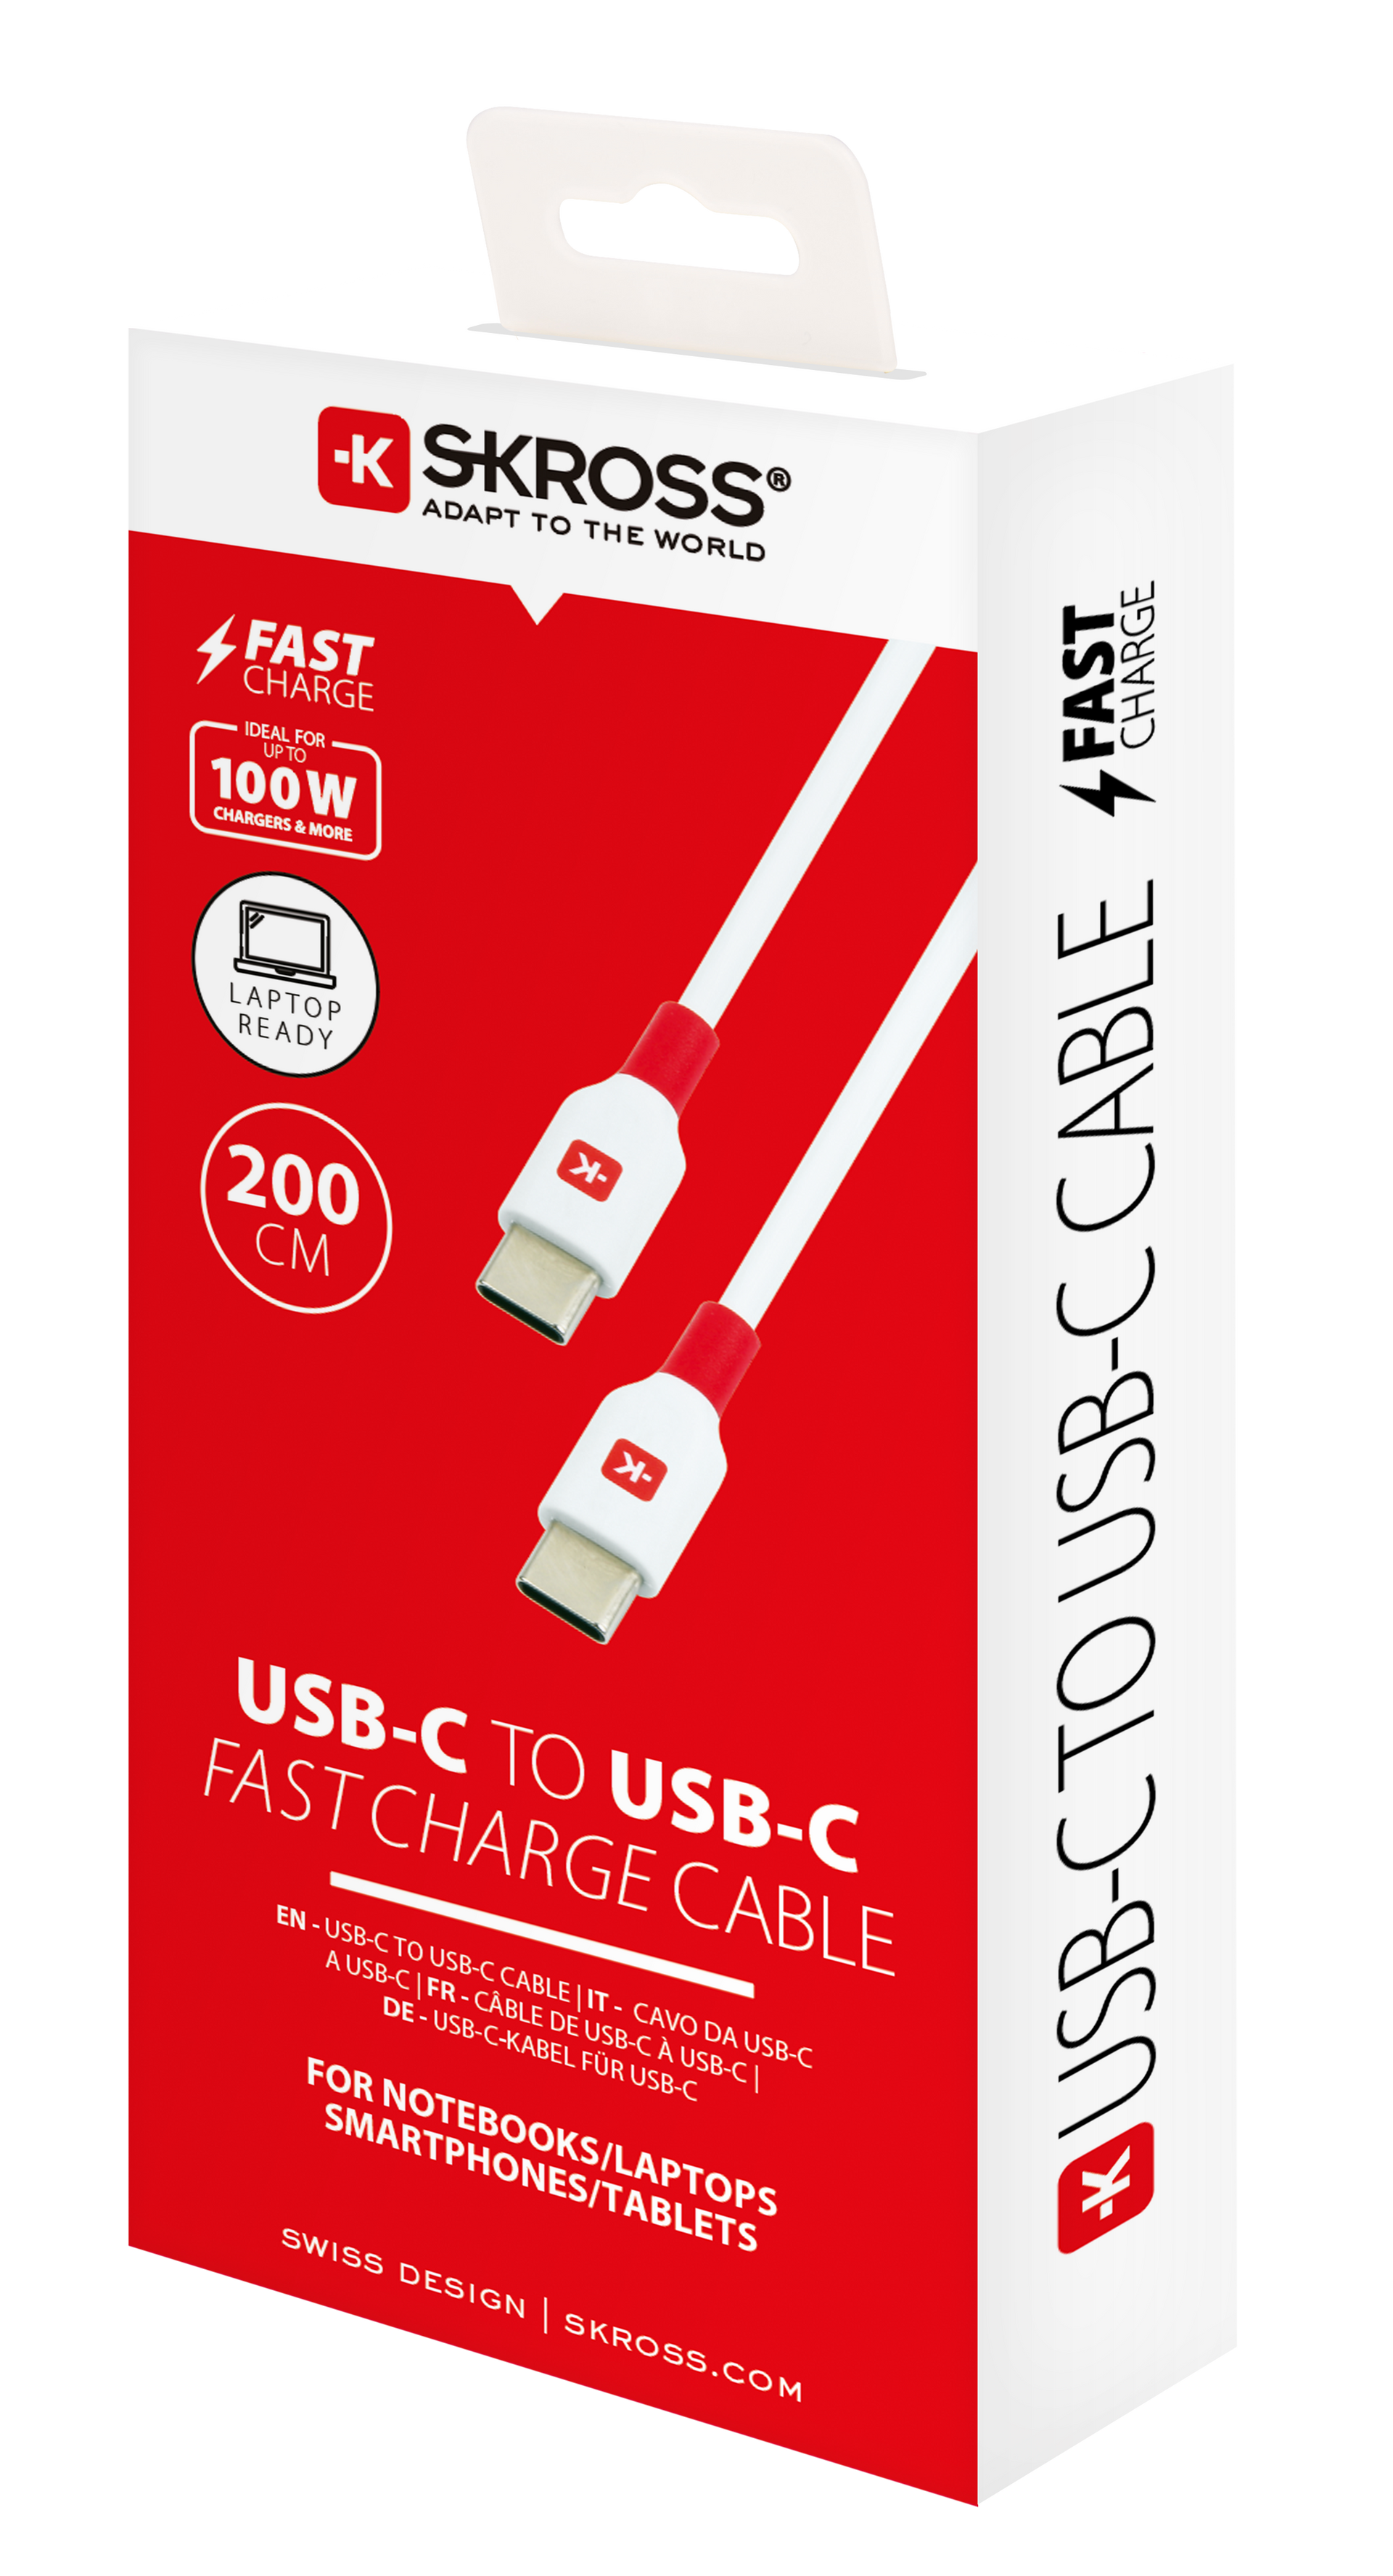 Skross USB-C to USB-C Charging Cable Packaging